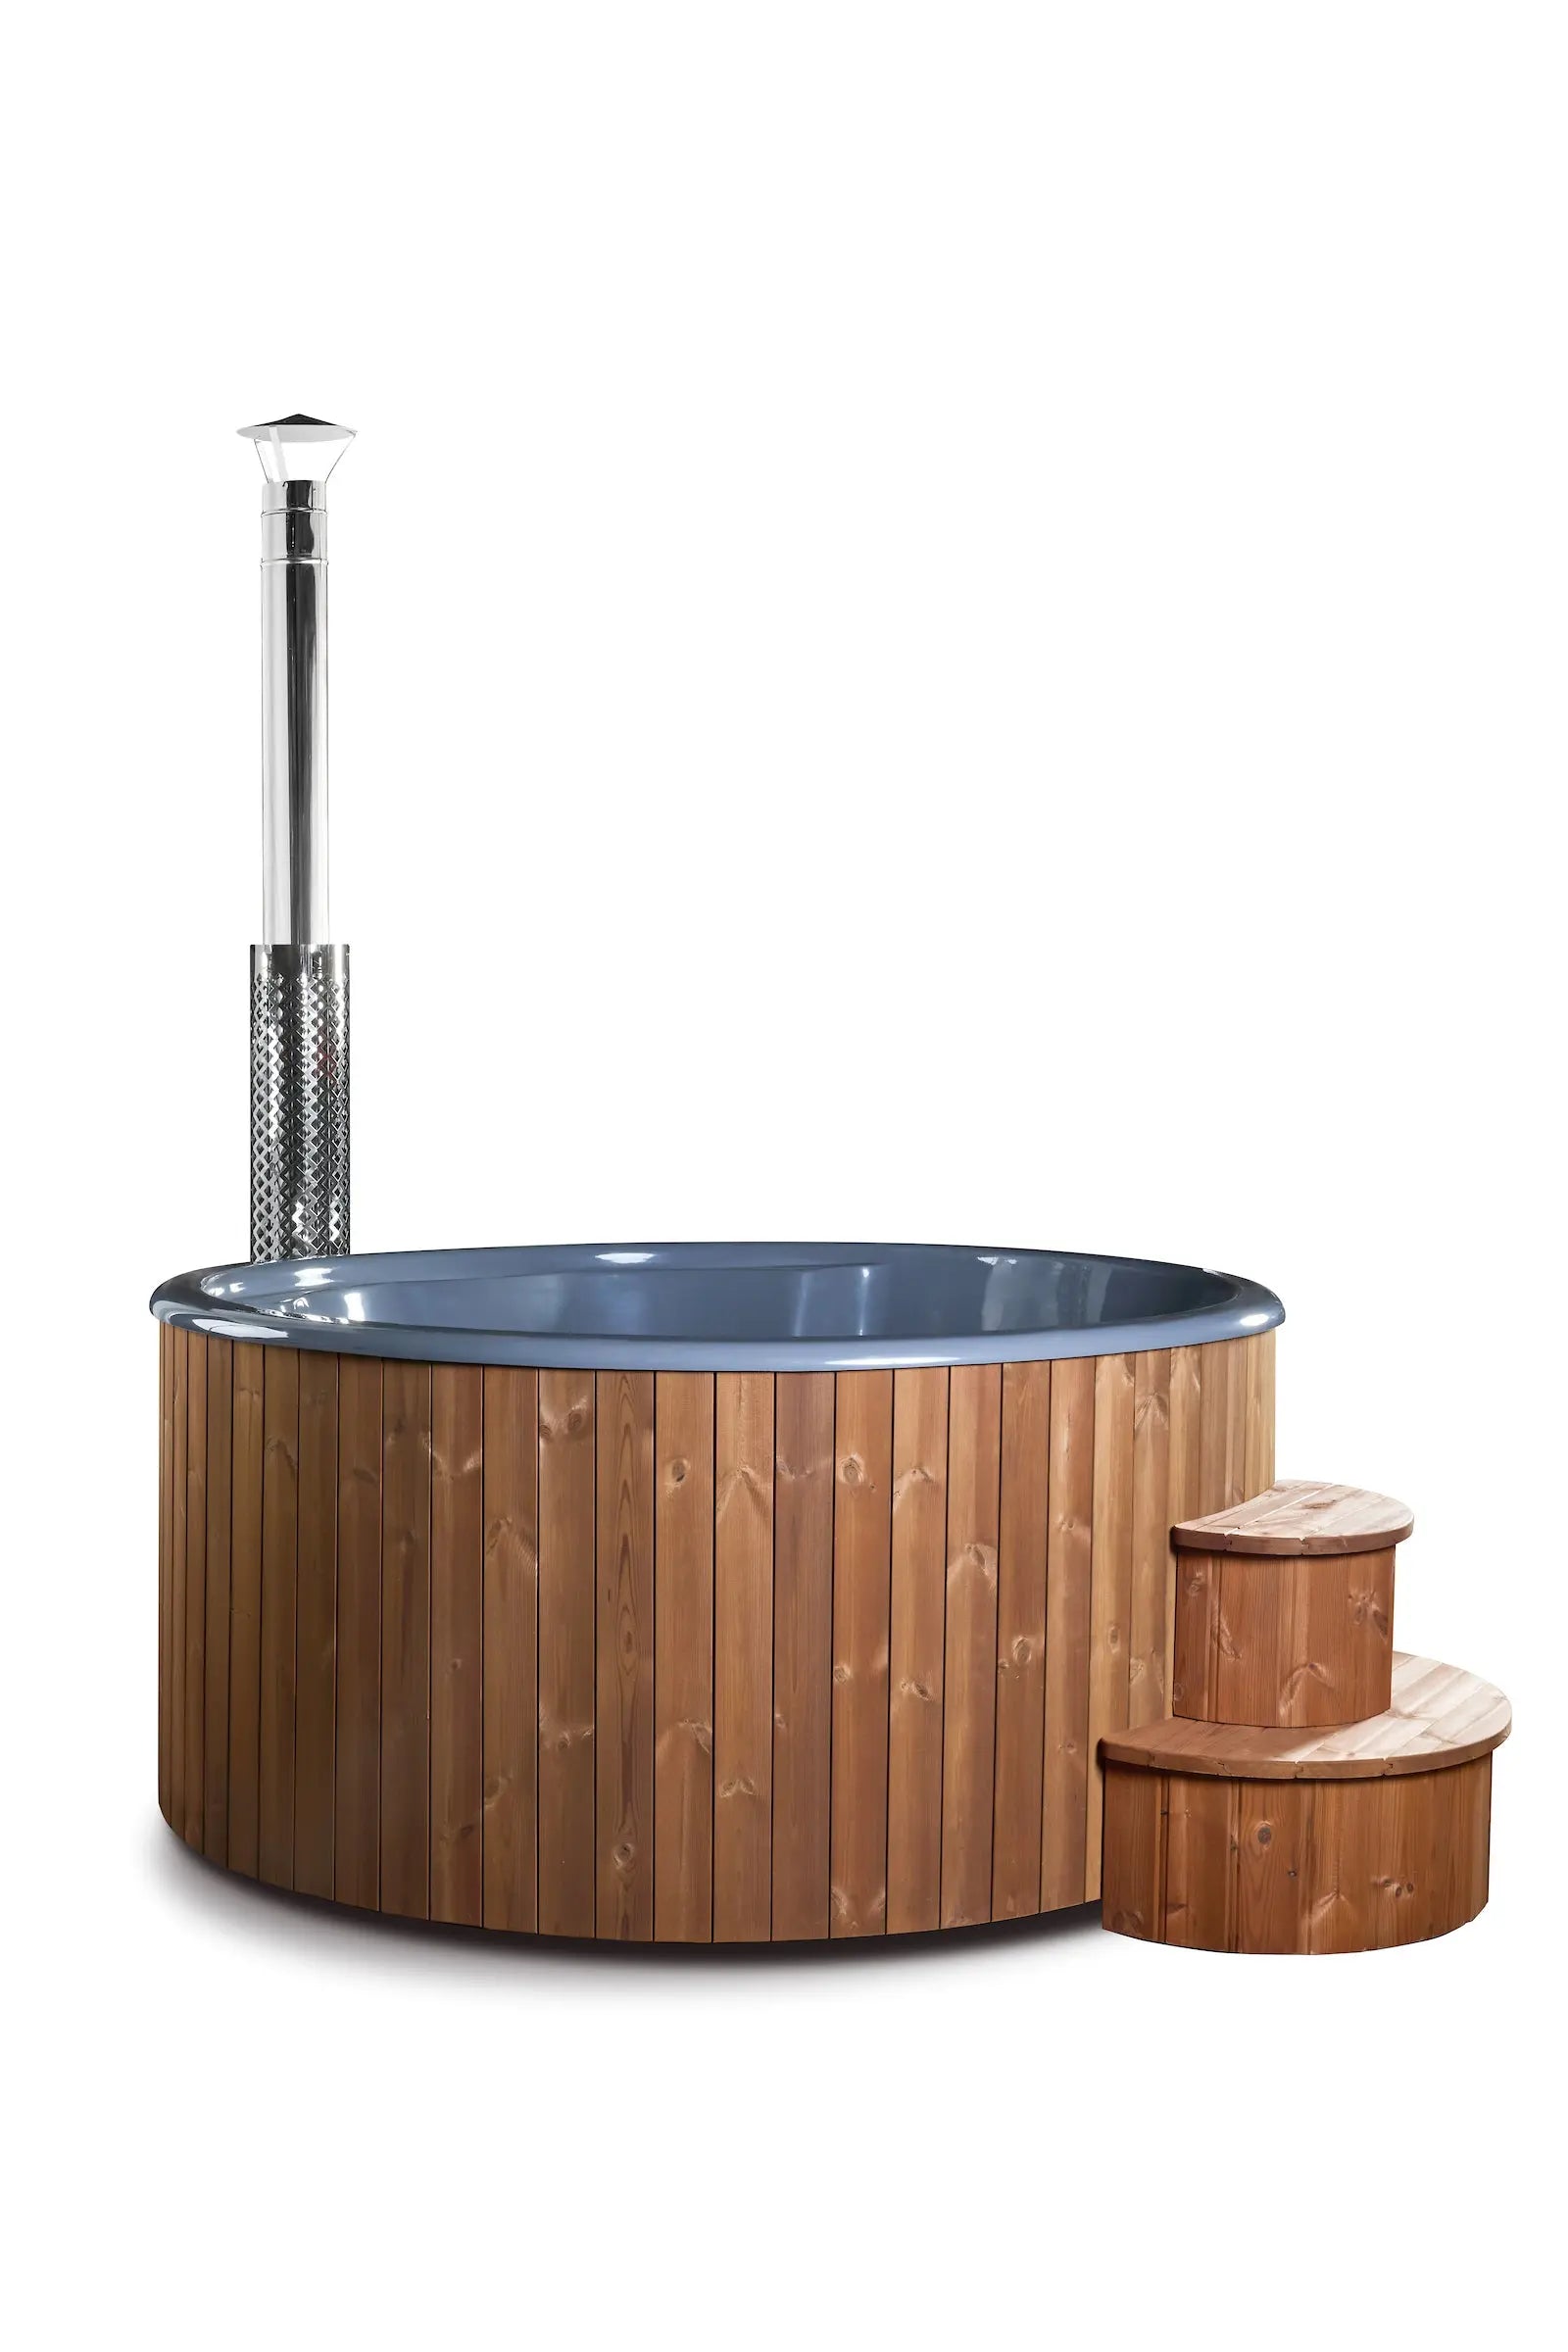 Deluxe Wood Fired Hot Tub With Liner XL Backcountry Recreation